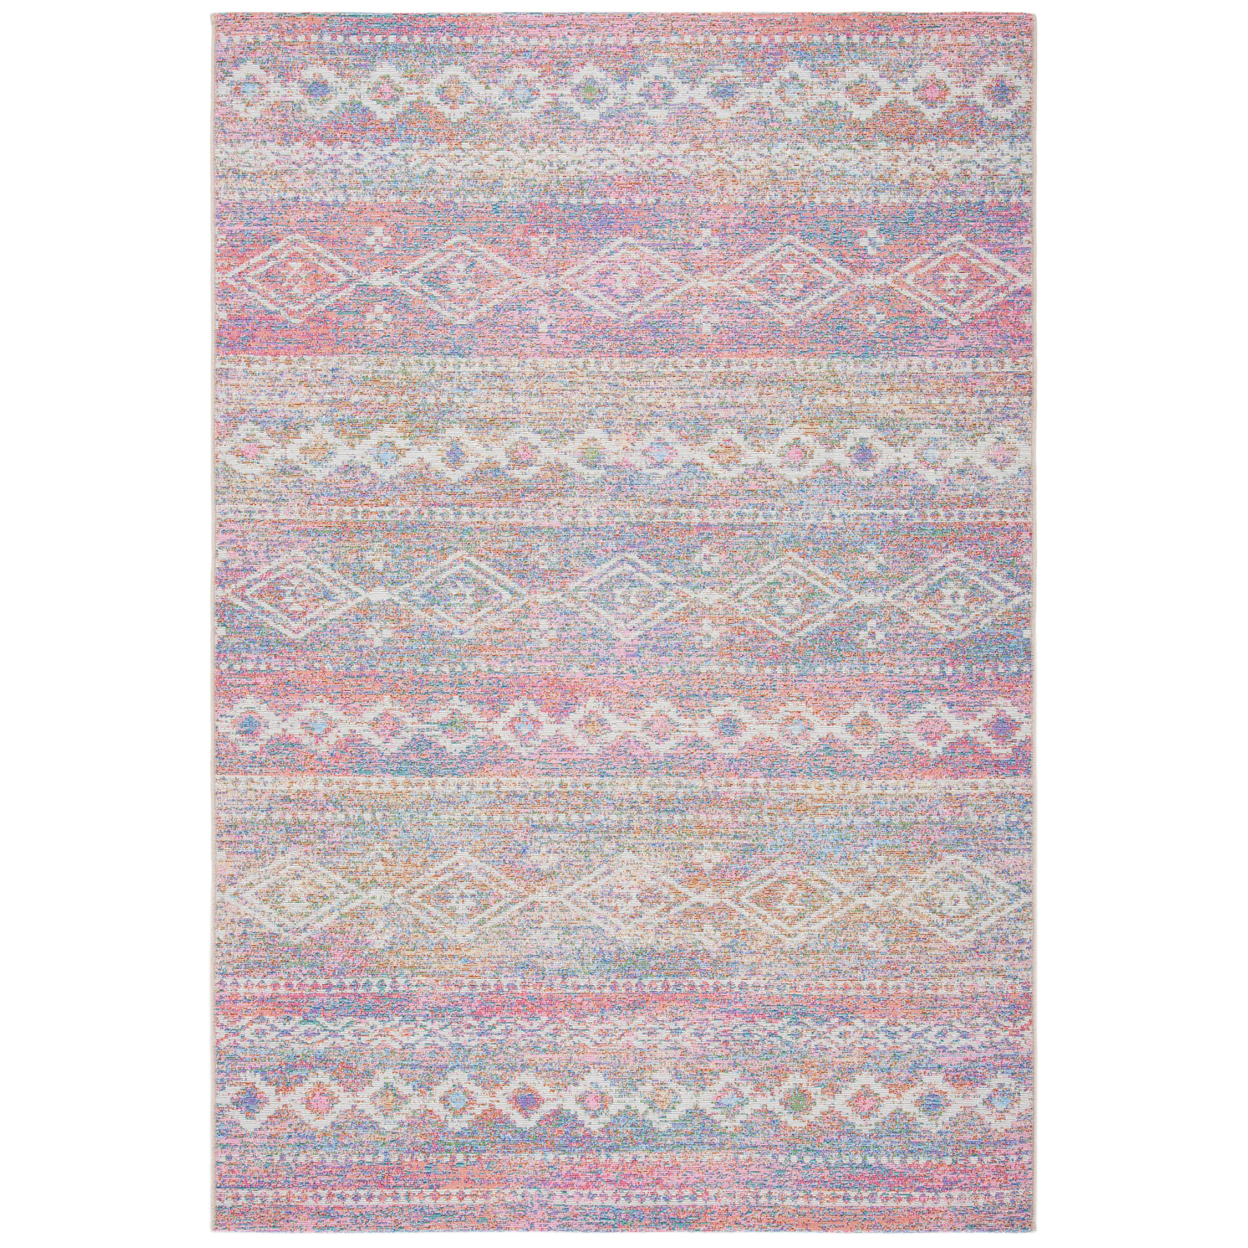 Safavieh SMR498A Summer Ivory / Pink - 6-7 X 6-7 Square